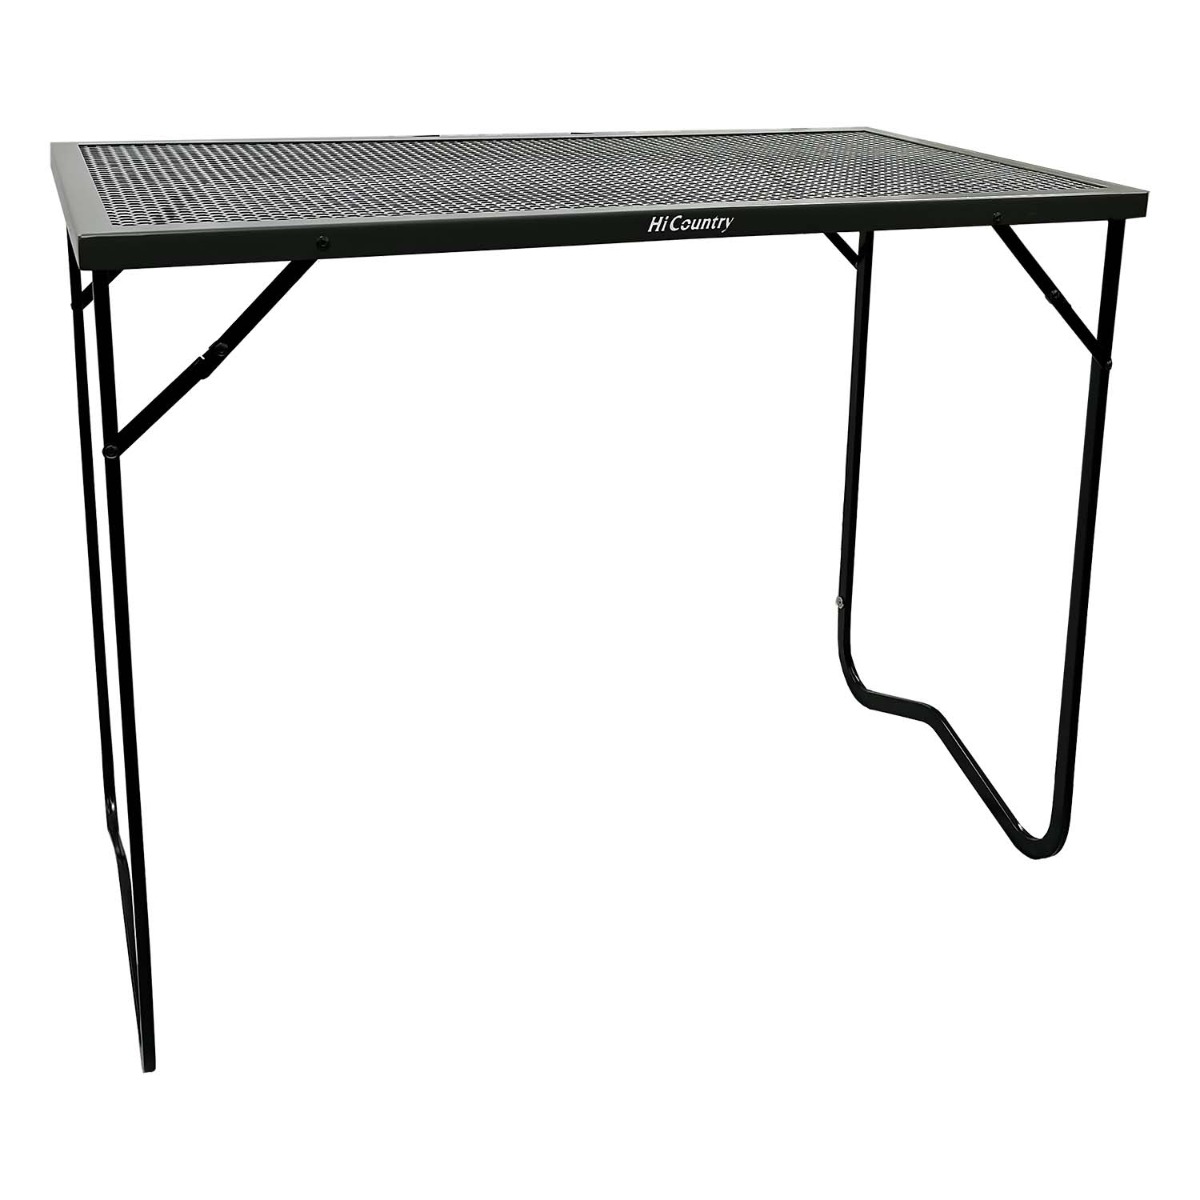 HI-COUNTRY RUGGED EXTREME TABLE MEDIUM